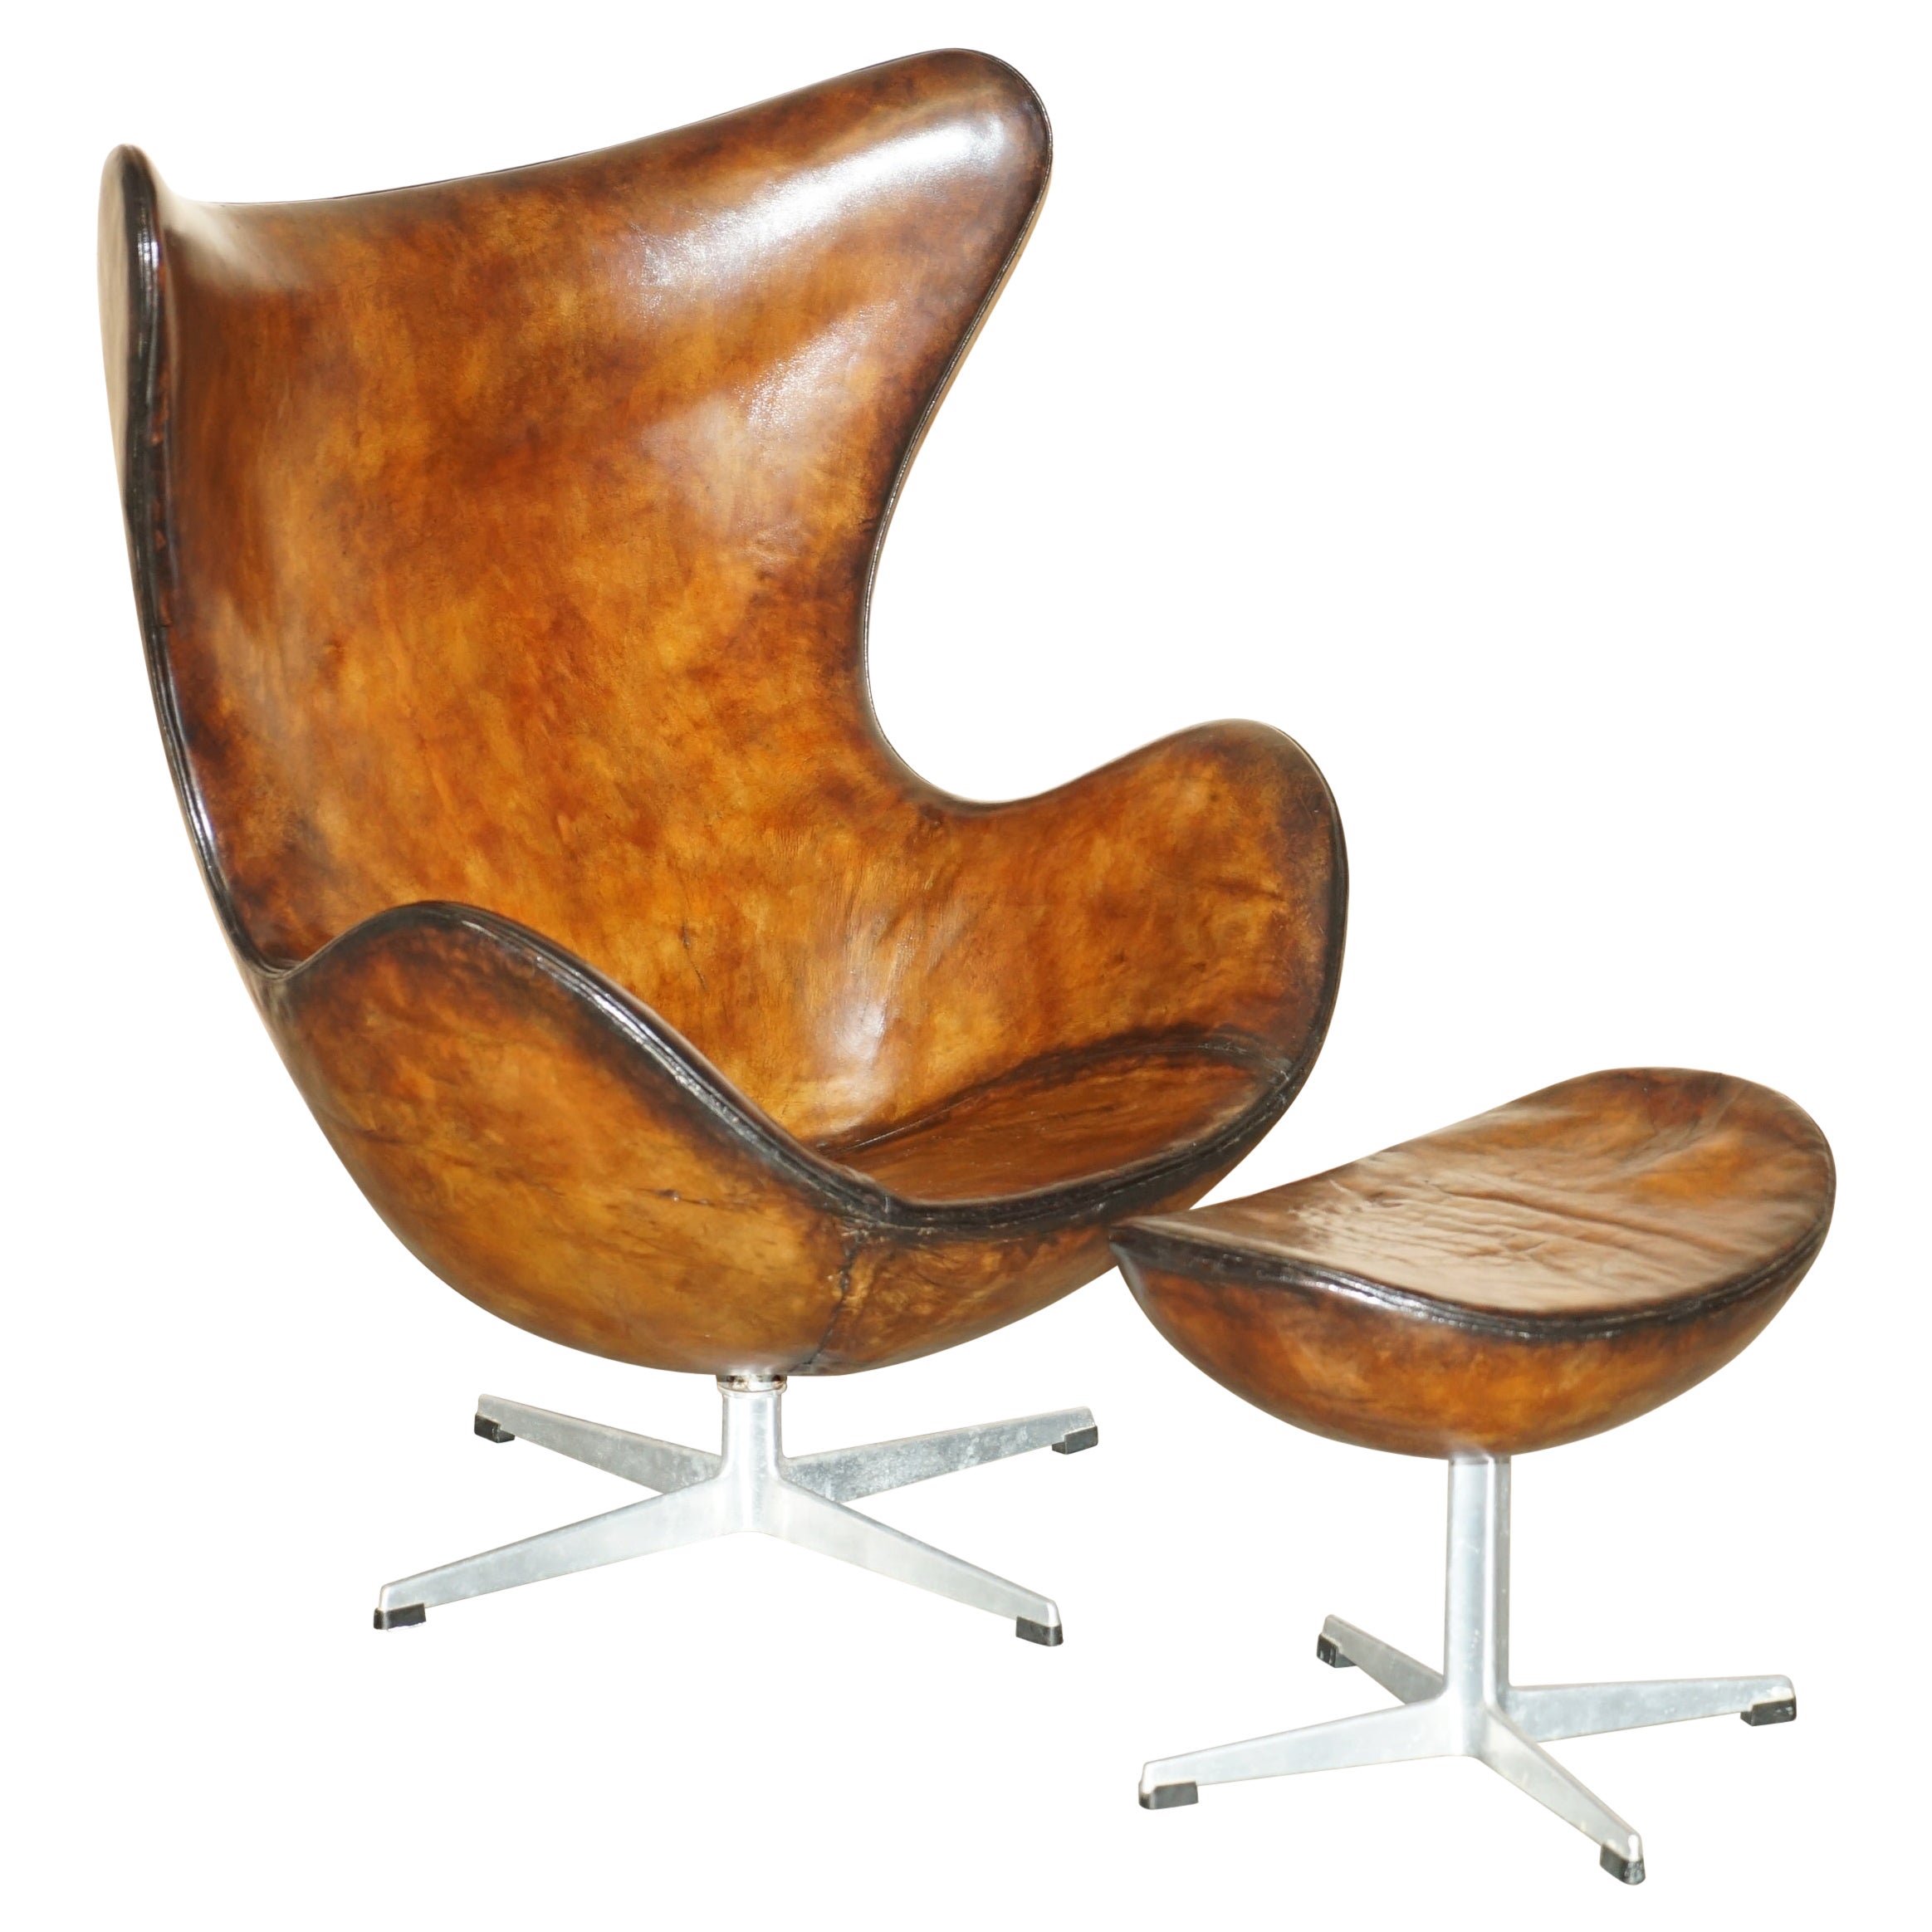 ORIGINAL FULLY RESTORED 1965 FRITZ HANSEN EGG CHAiR & FOOTSTOOL IN BROWN LEATHER For Sale